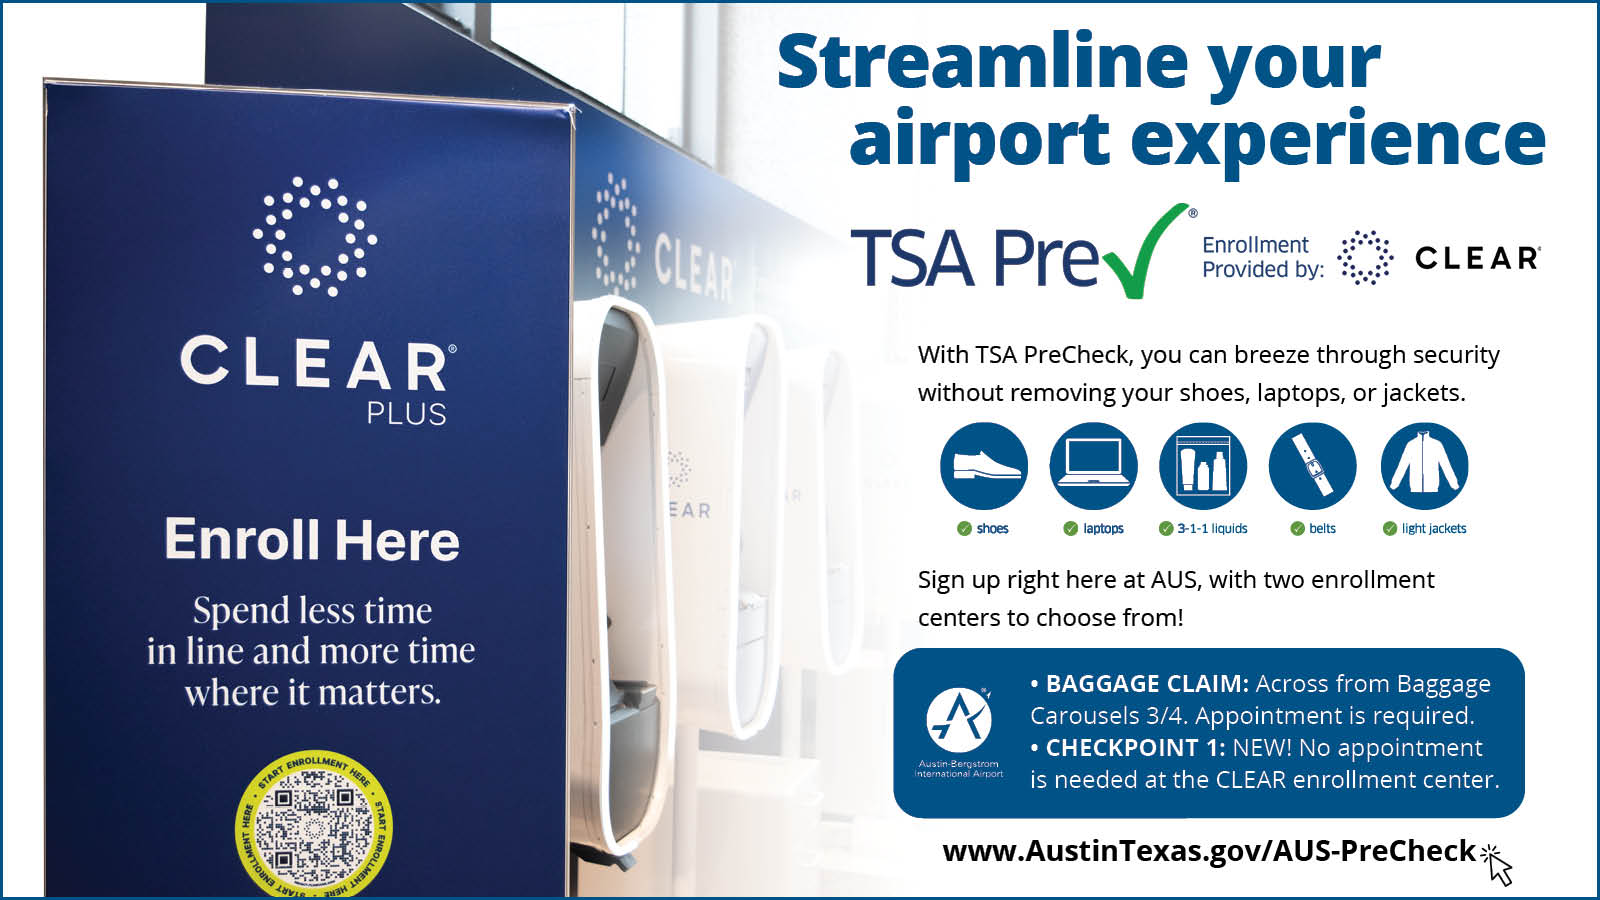 Graphic that reads, "Streamline your airport experience: TSA PreCheck, enrollment provided by Clear. With TSA PreCheck, you can breeze through security without removing your shoes, laptops, or jackets. Sign up right here at AUS, with two enrollment centers to choose from: Baggage Claim, across from Baggage Carousels 3/4, appointment required. Checkpoint 1: NEW: No appointment is needed at the CLEAR enrollment center.